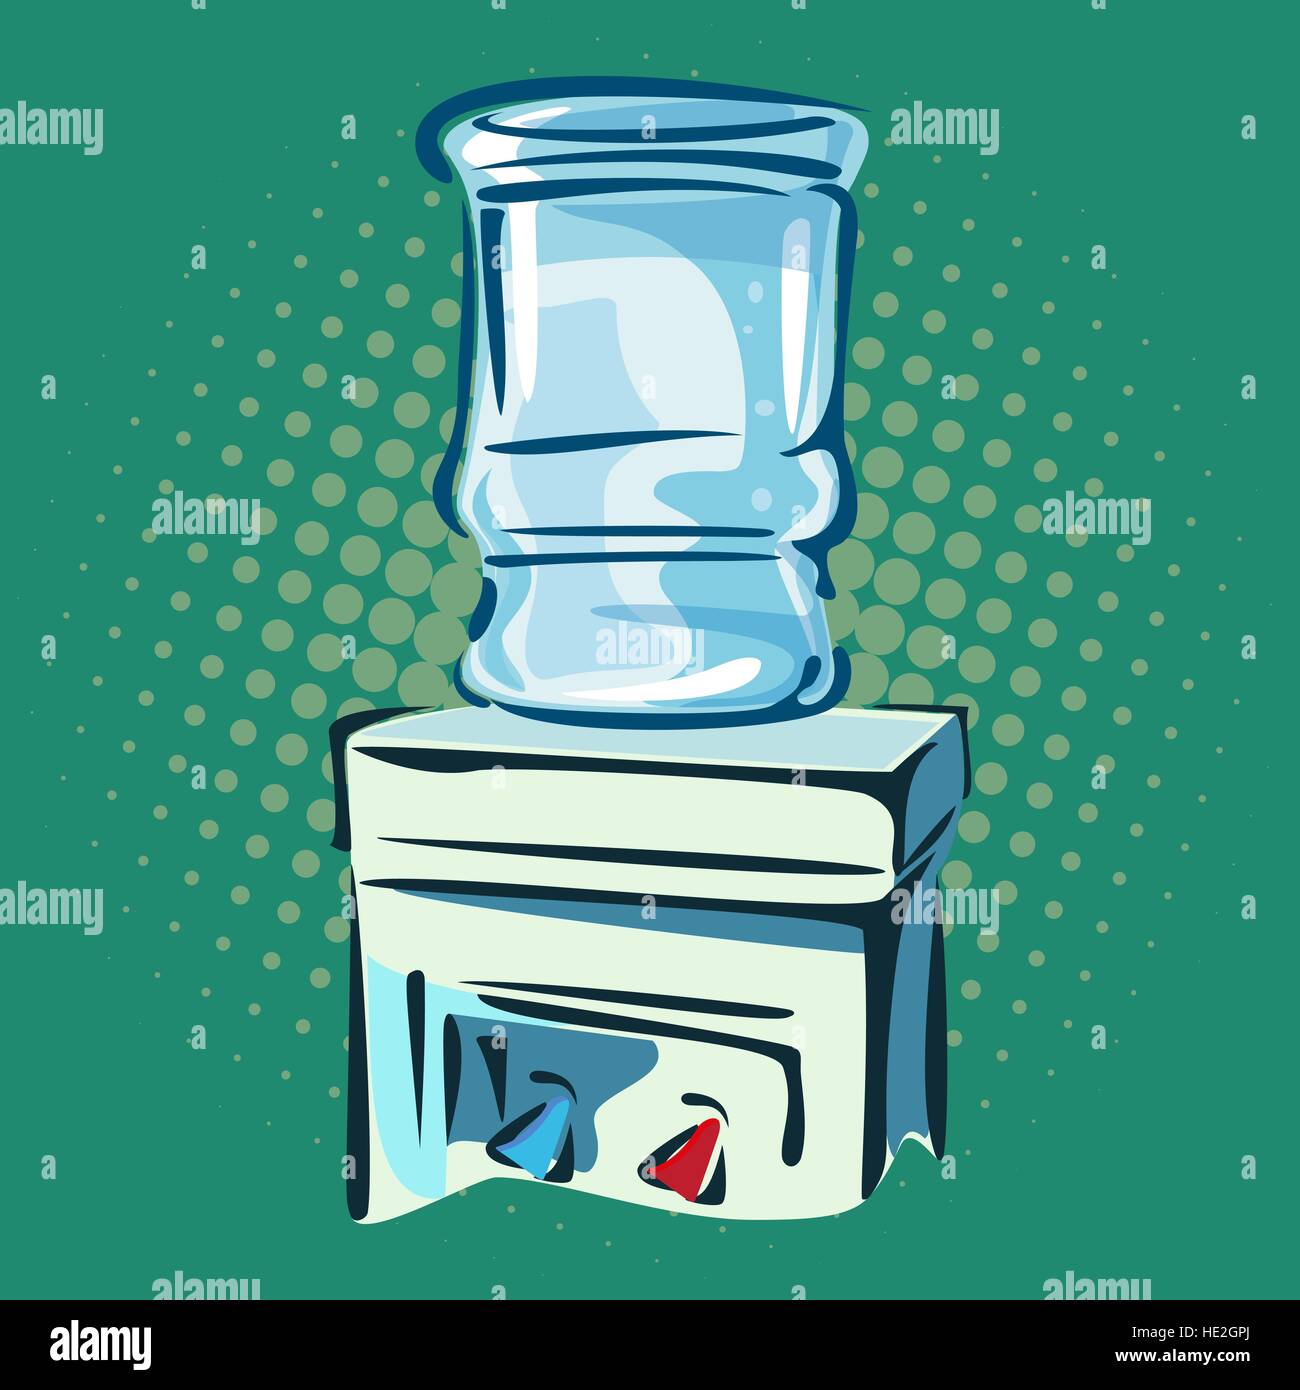 Hand drawn pop art illustration of water cooler. Retro style. Stock Vector